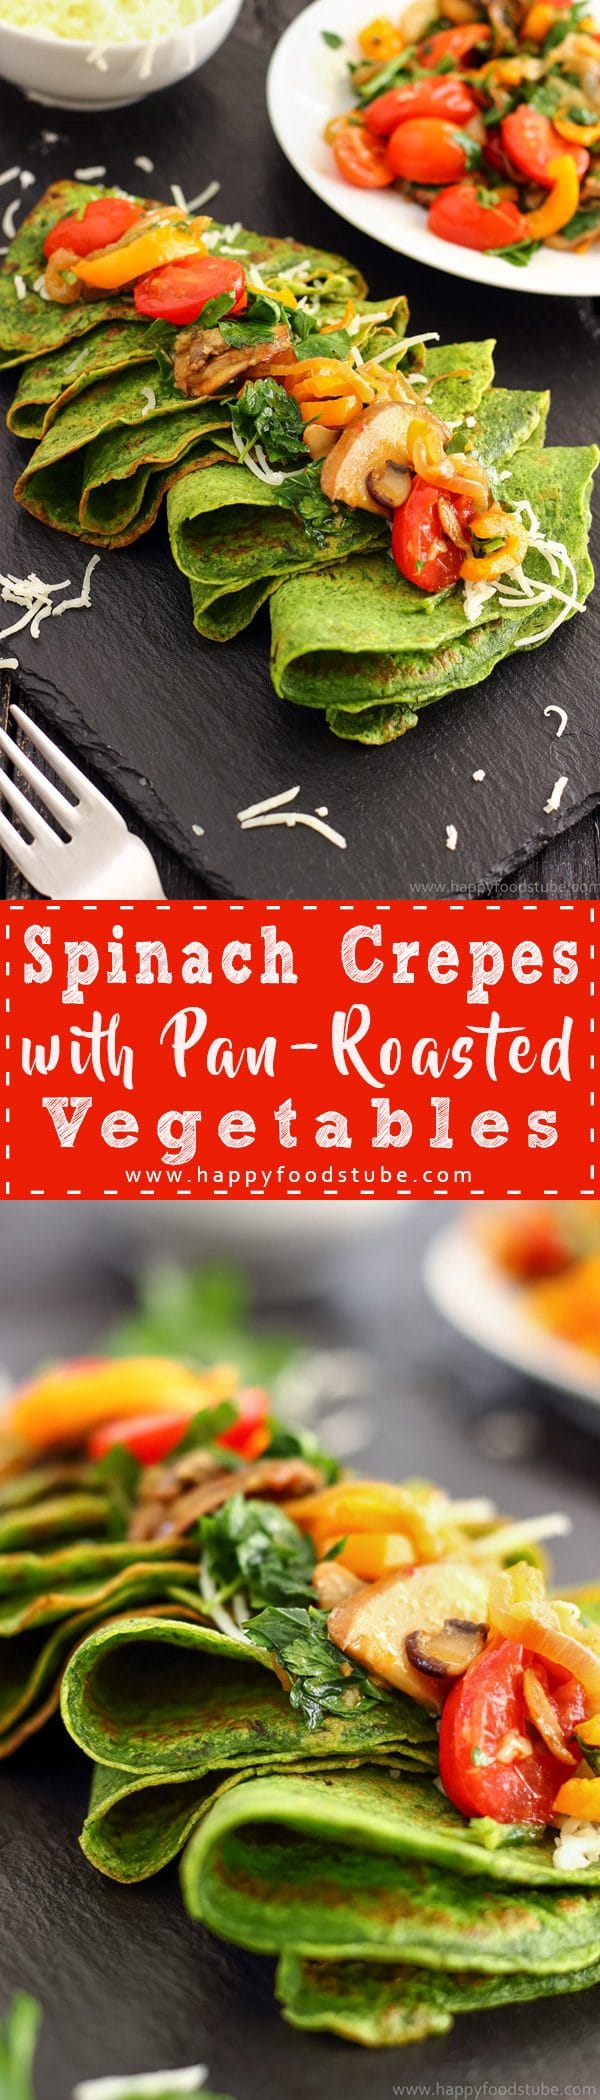 Spinach Crepes with Pan-Roasted Vegetables Recipe